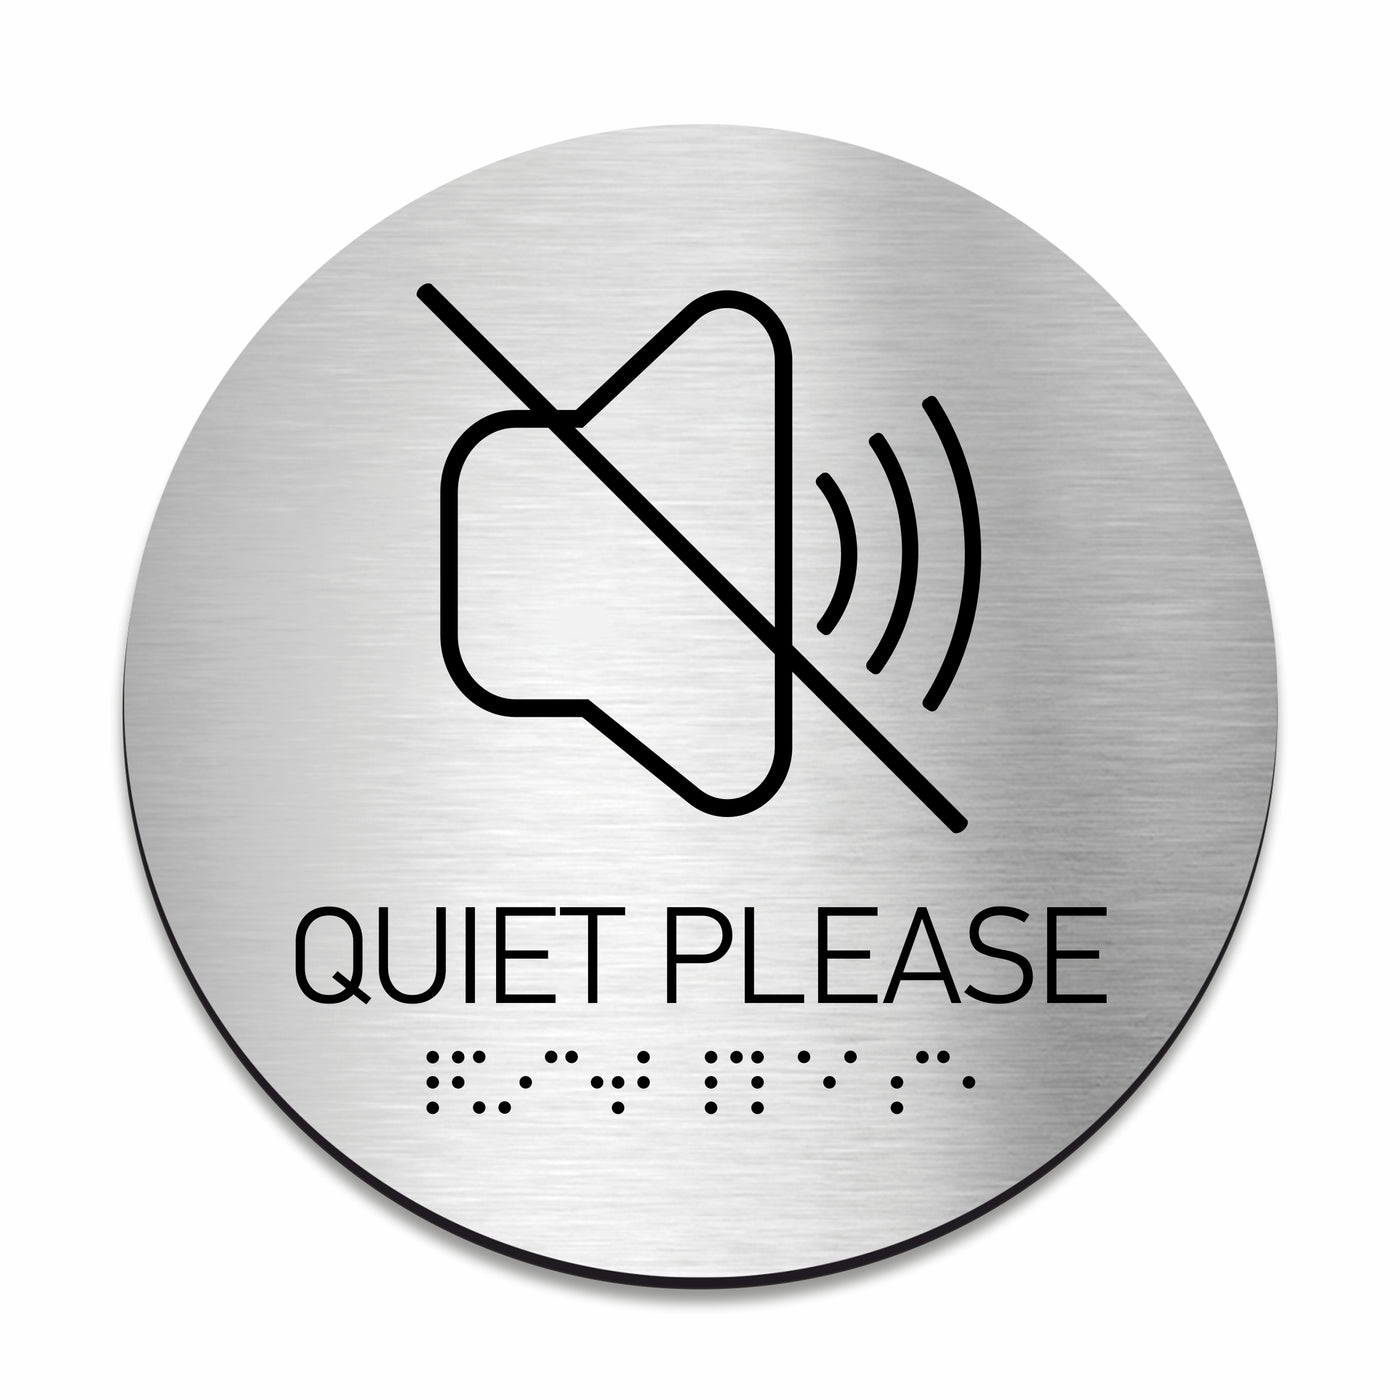 Information Signs - Quiet Please Sign - Steel Sign